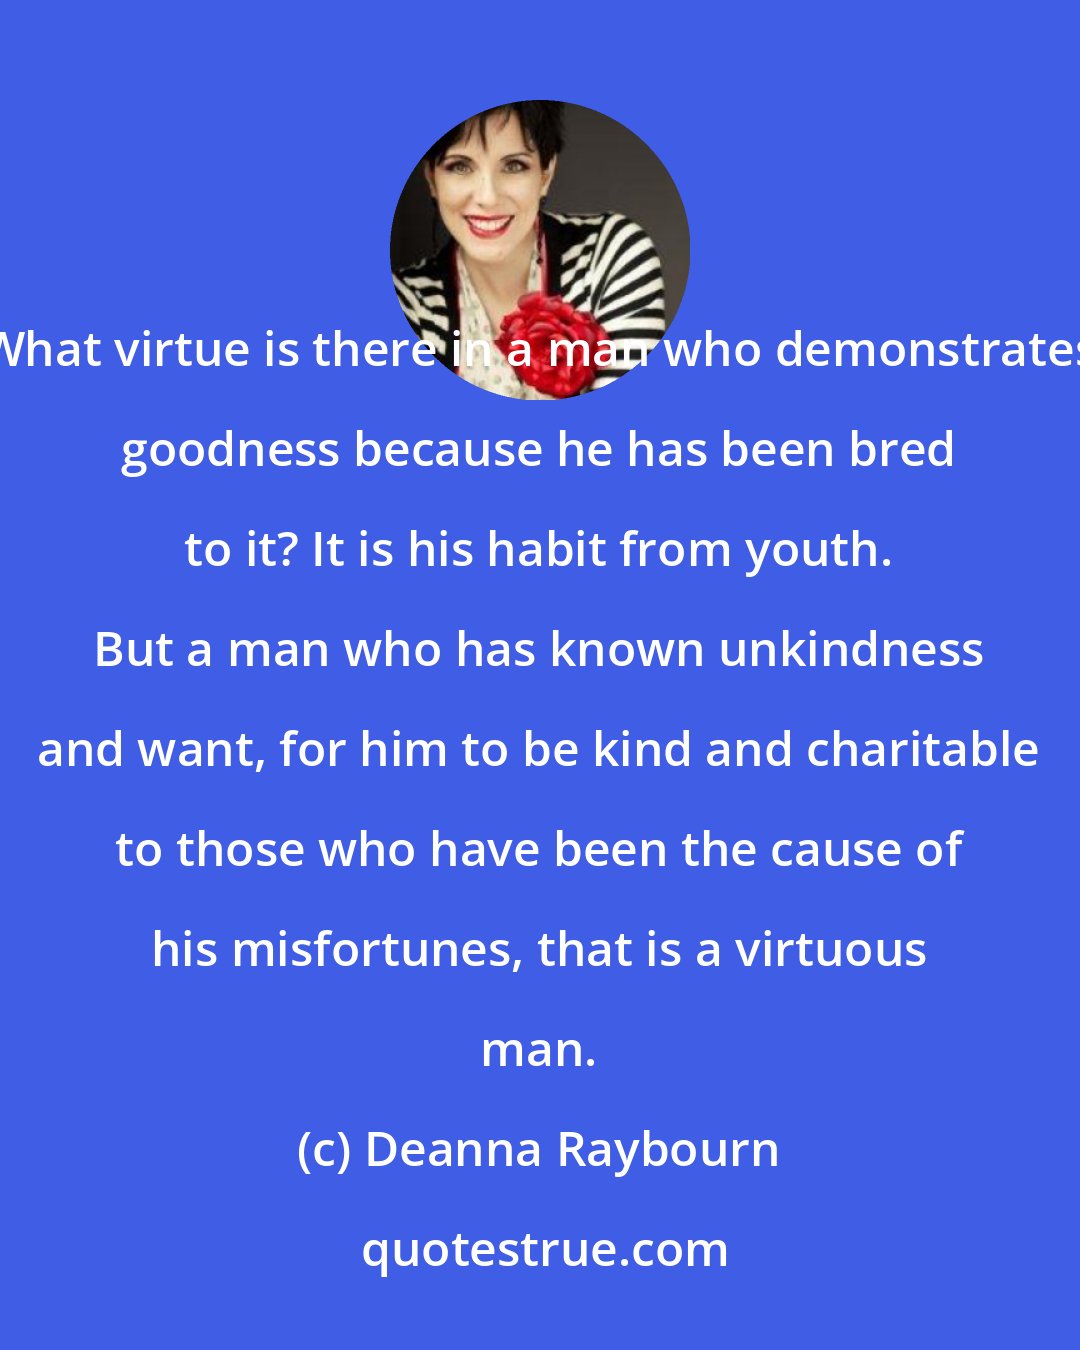 Deanna Raybourn: What virtue is there in a man who demonstrates goodness because he has been bred to it? It is his habit from youth. But a man who has known unkindness and want, for him to be kind and charitable to those who have been the cause of his misfortunes, that is a virtuous man.